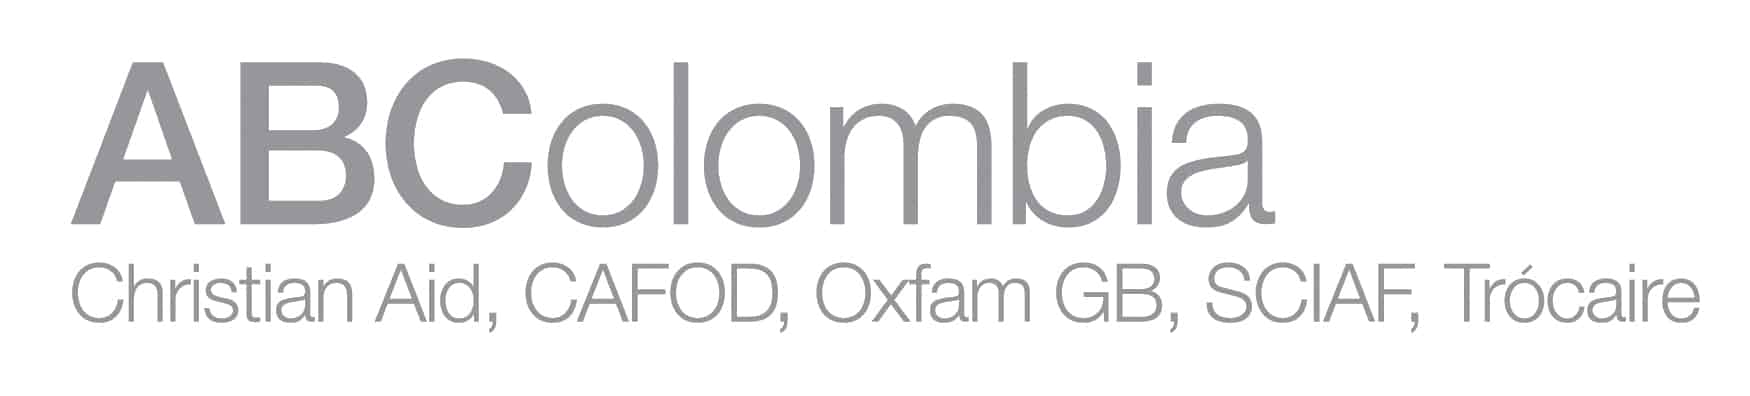 ABColombia logo_RGB